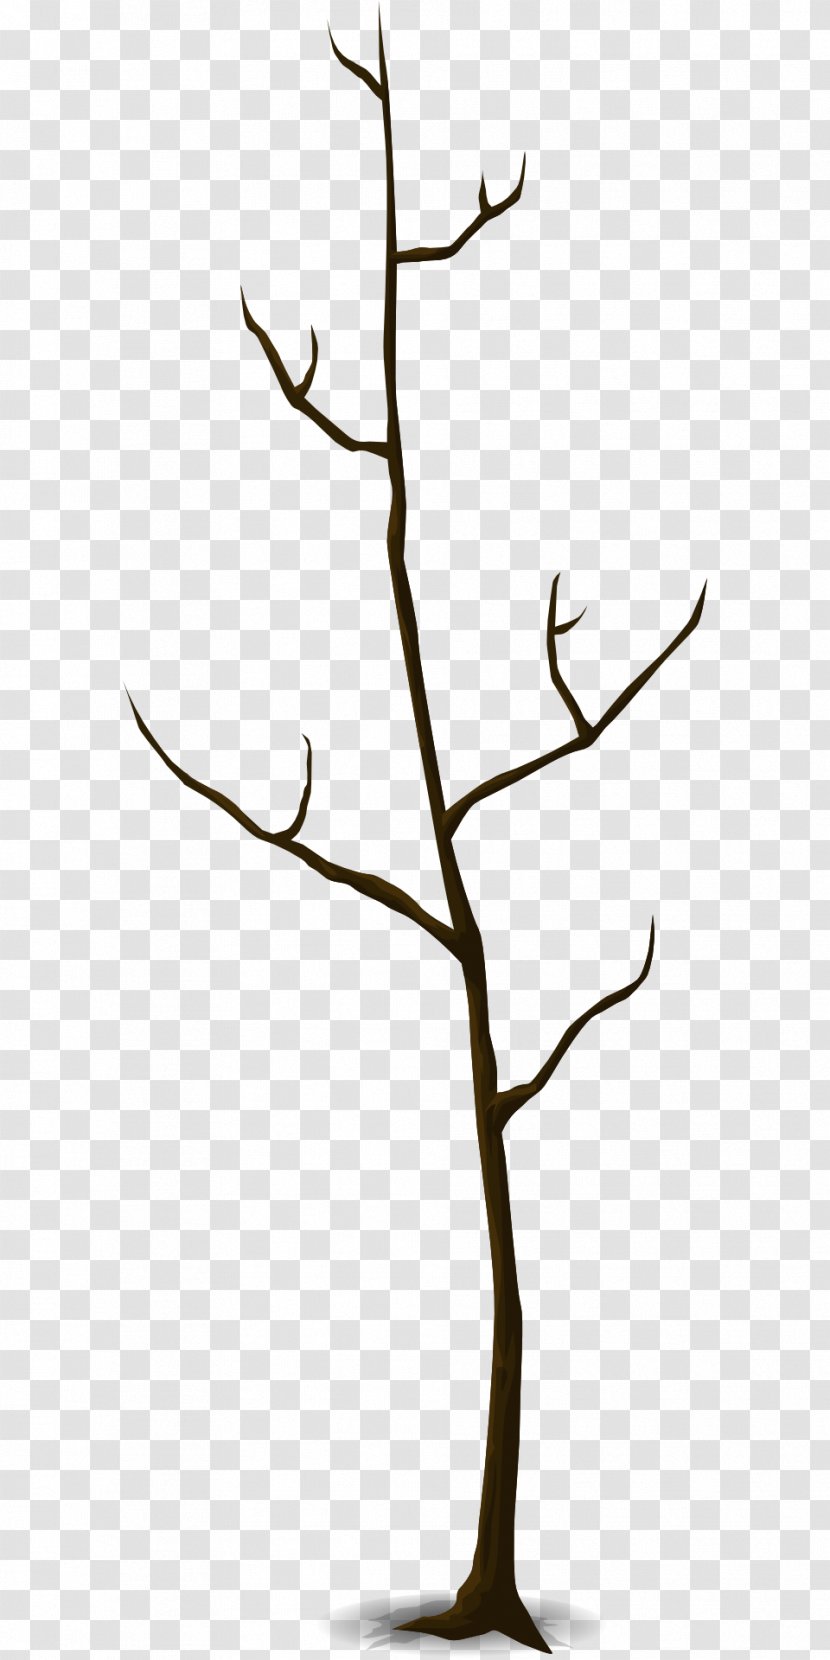 Twig Trunk Leaf Tree Branch - Root Transparent PNG